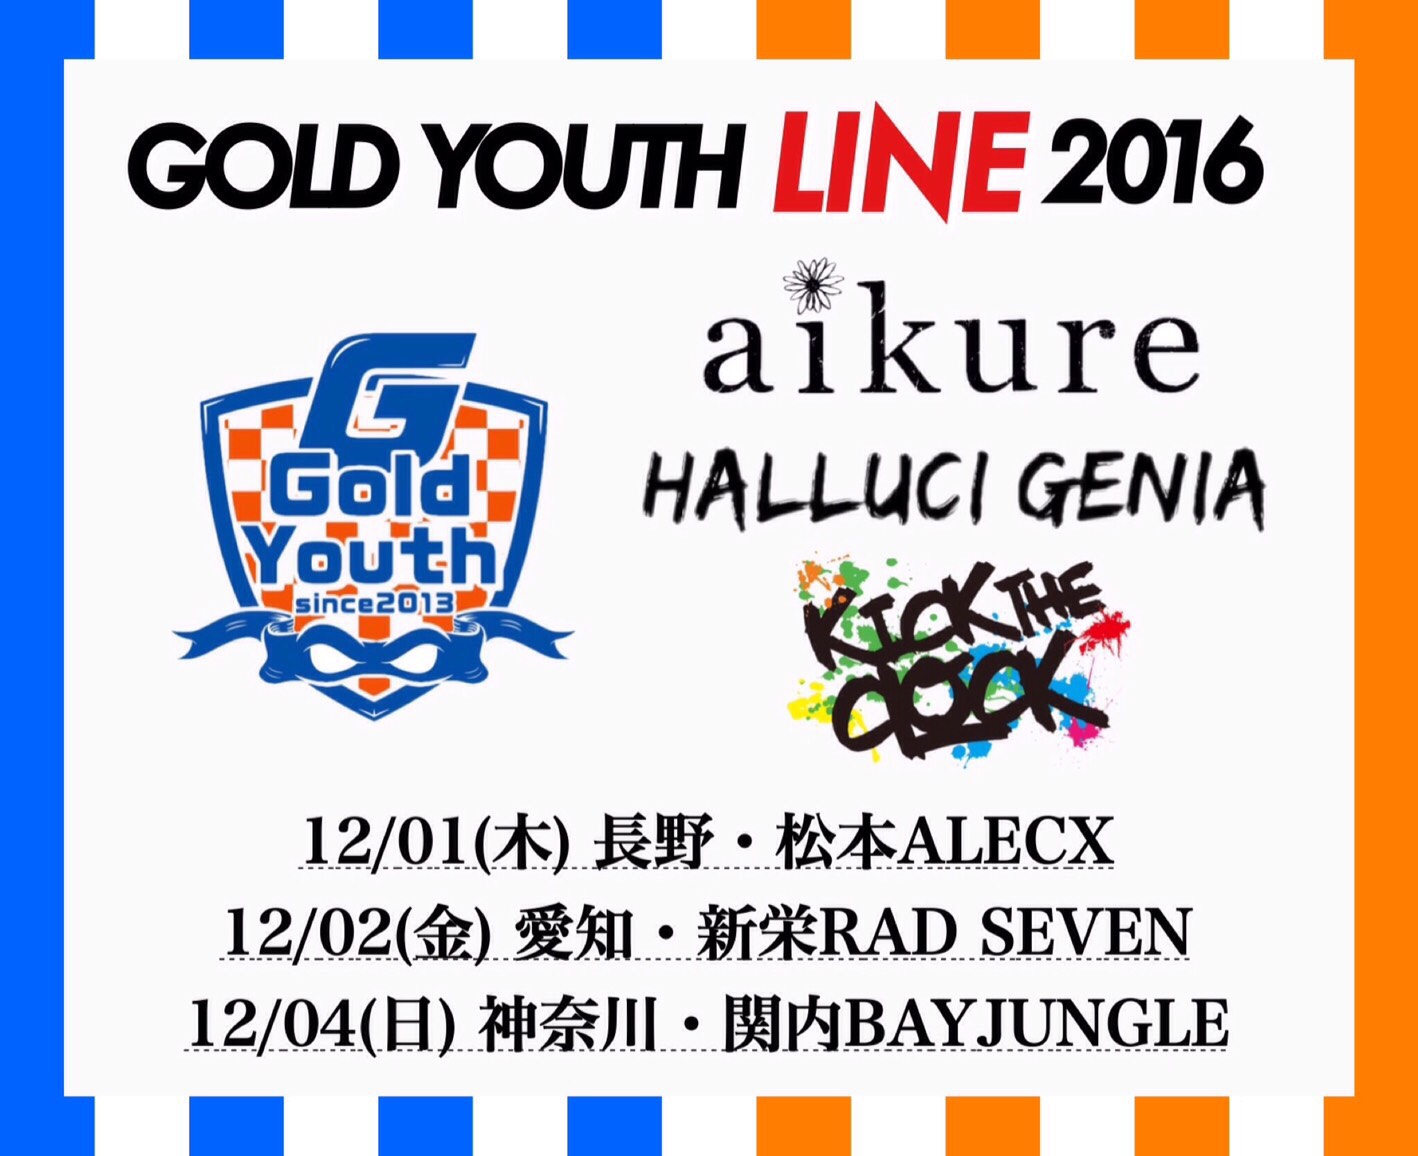 GOLD YOUTH LINE 2016～3rd Anniversary SP～